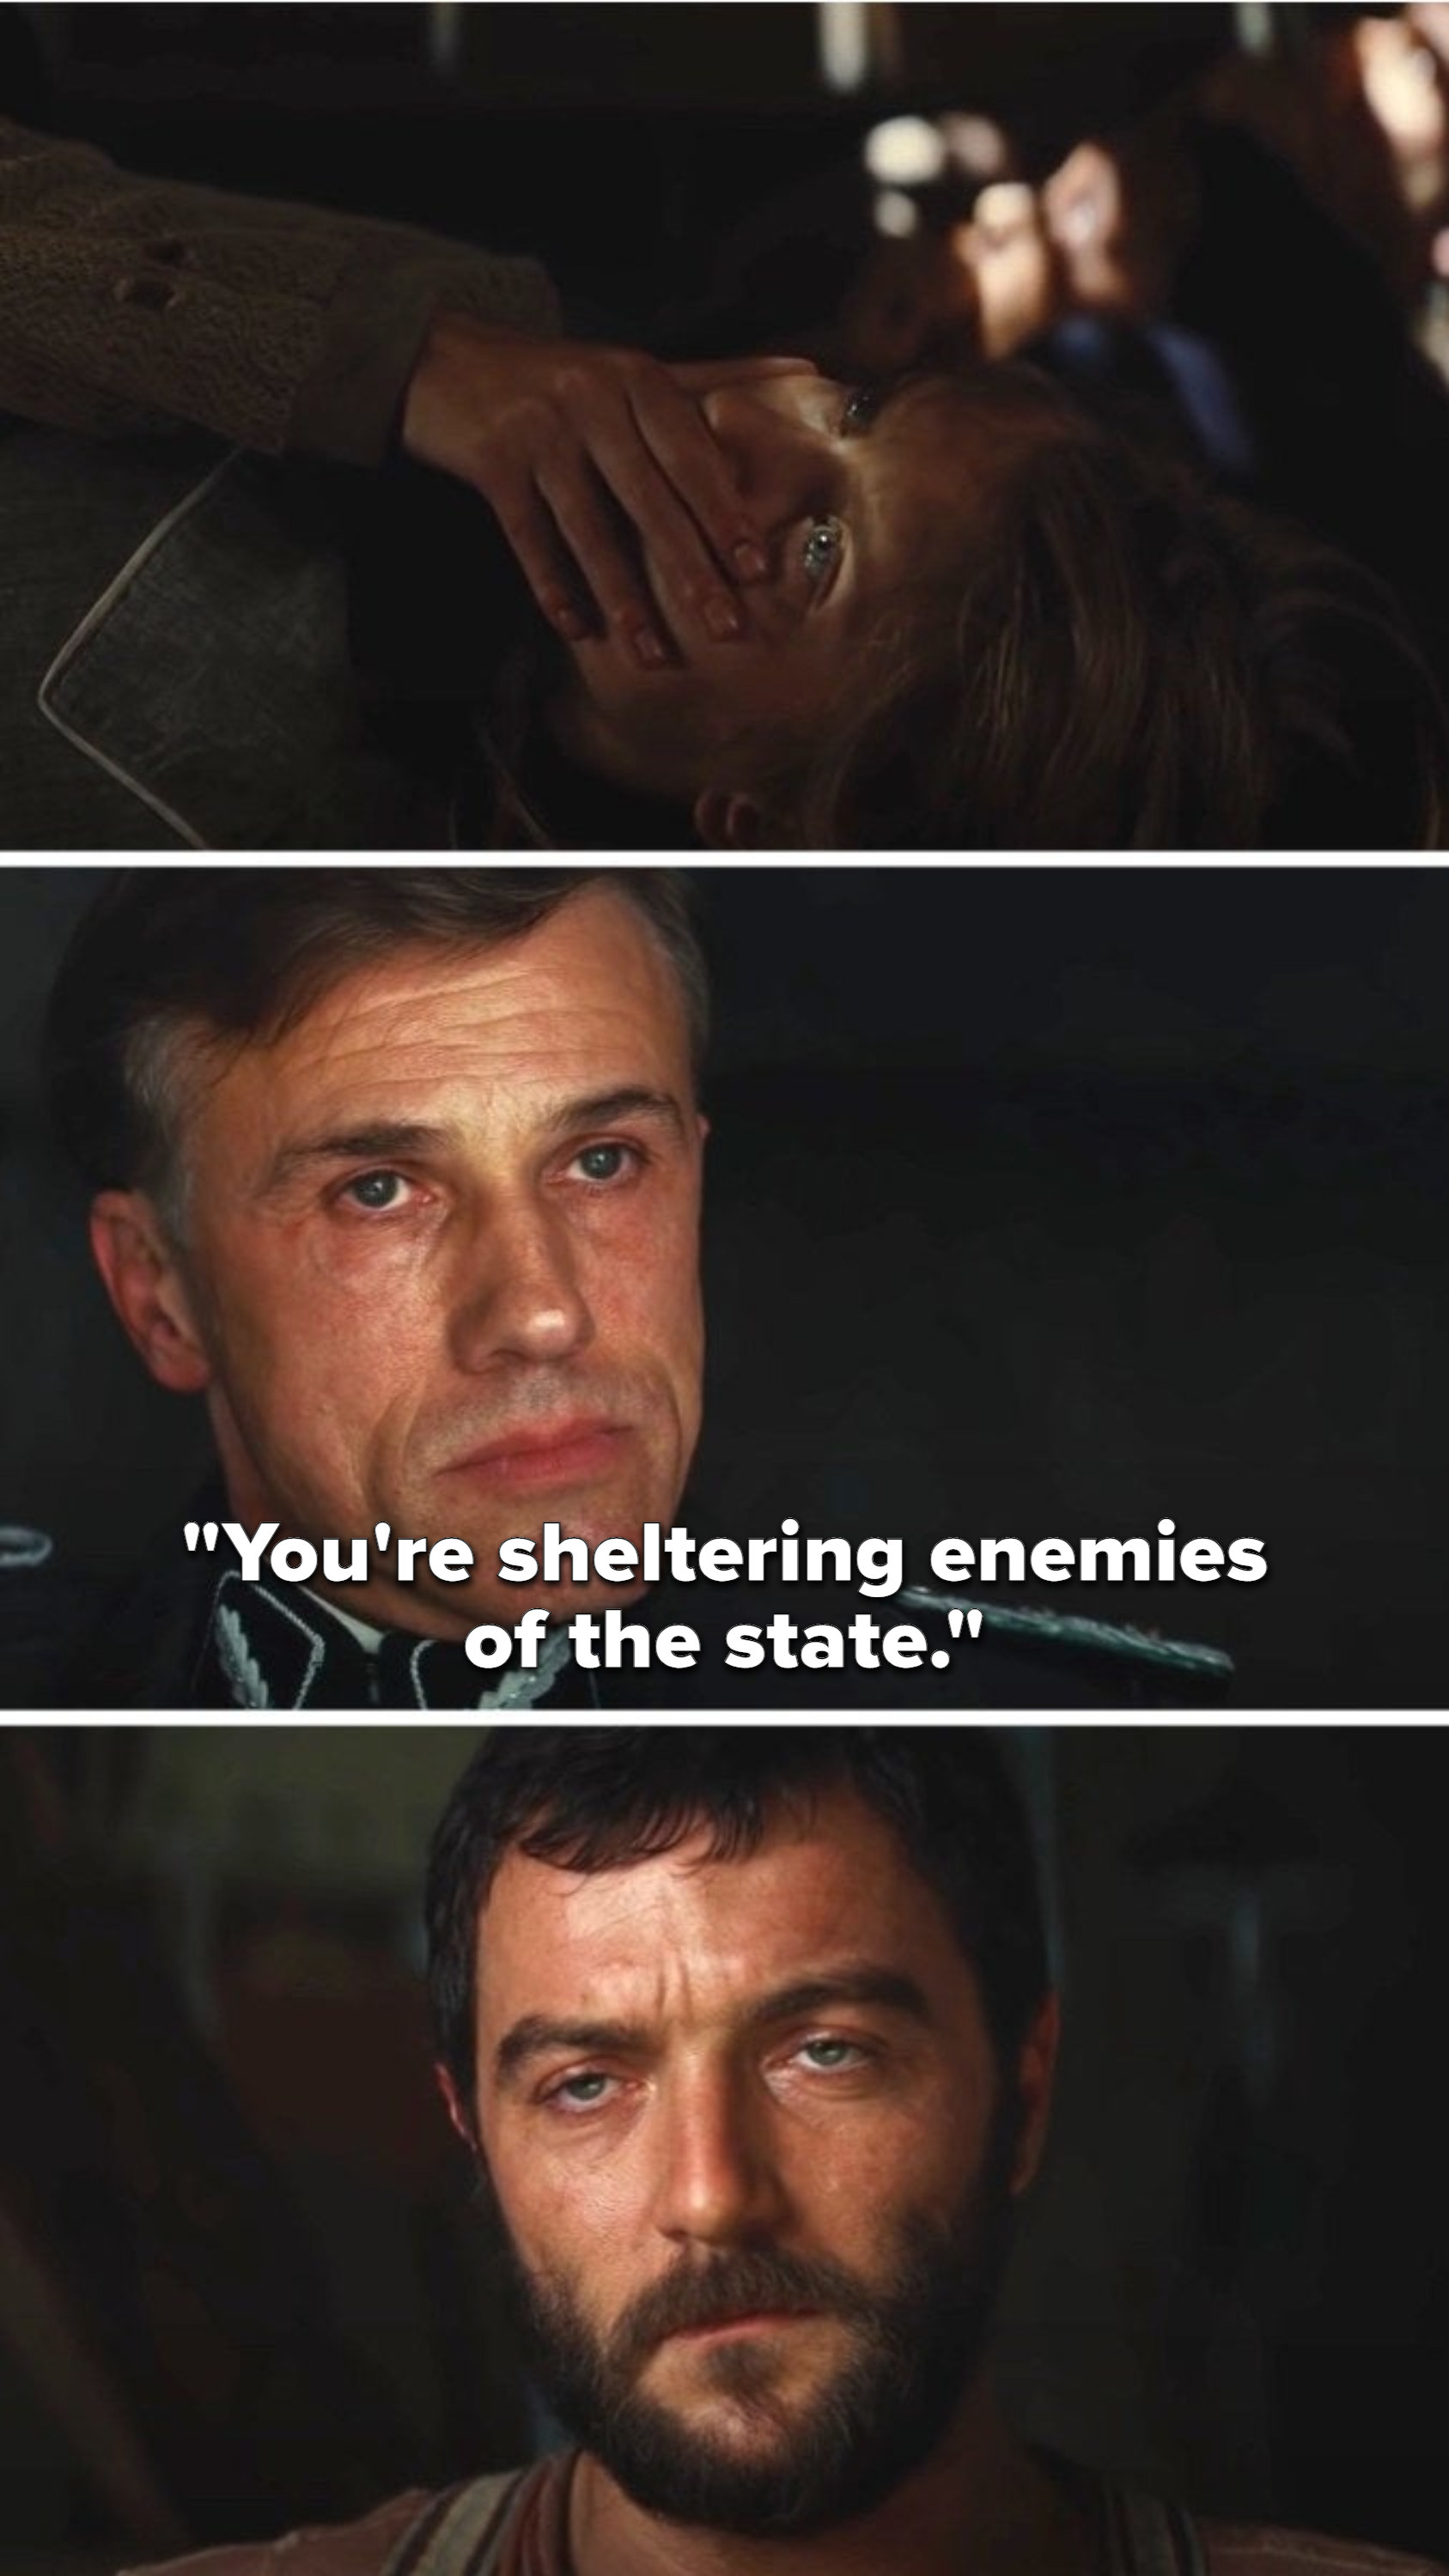 Hans Landa says &quot;You&#x27;re sheltering enemies of the state&quot; to the farmer as the Jewish family hides below the floorboards